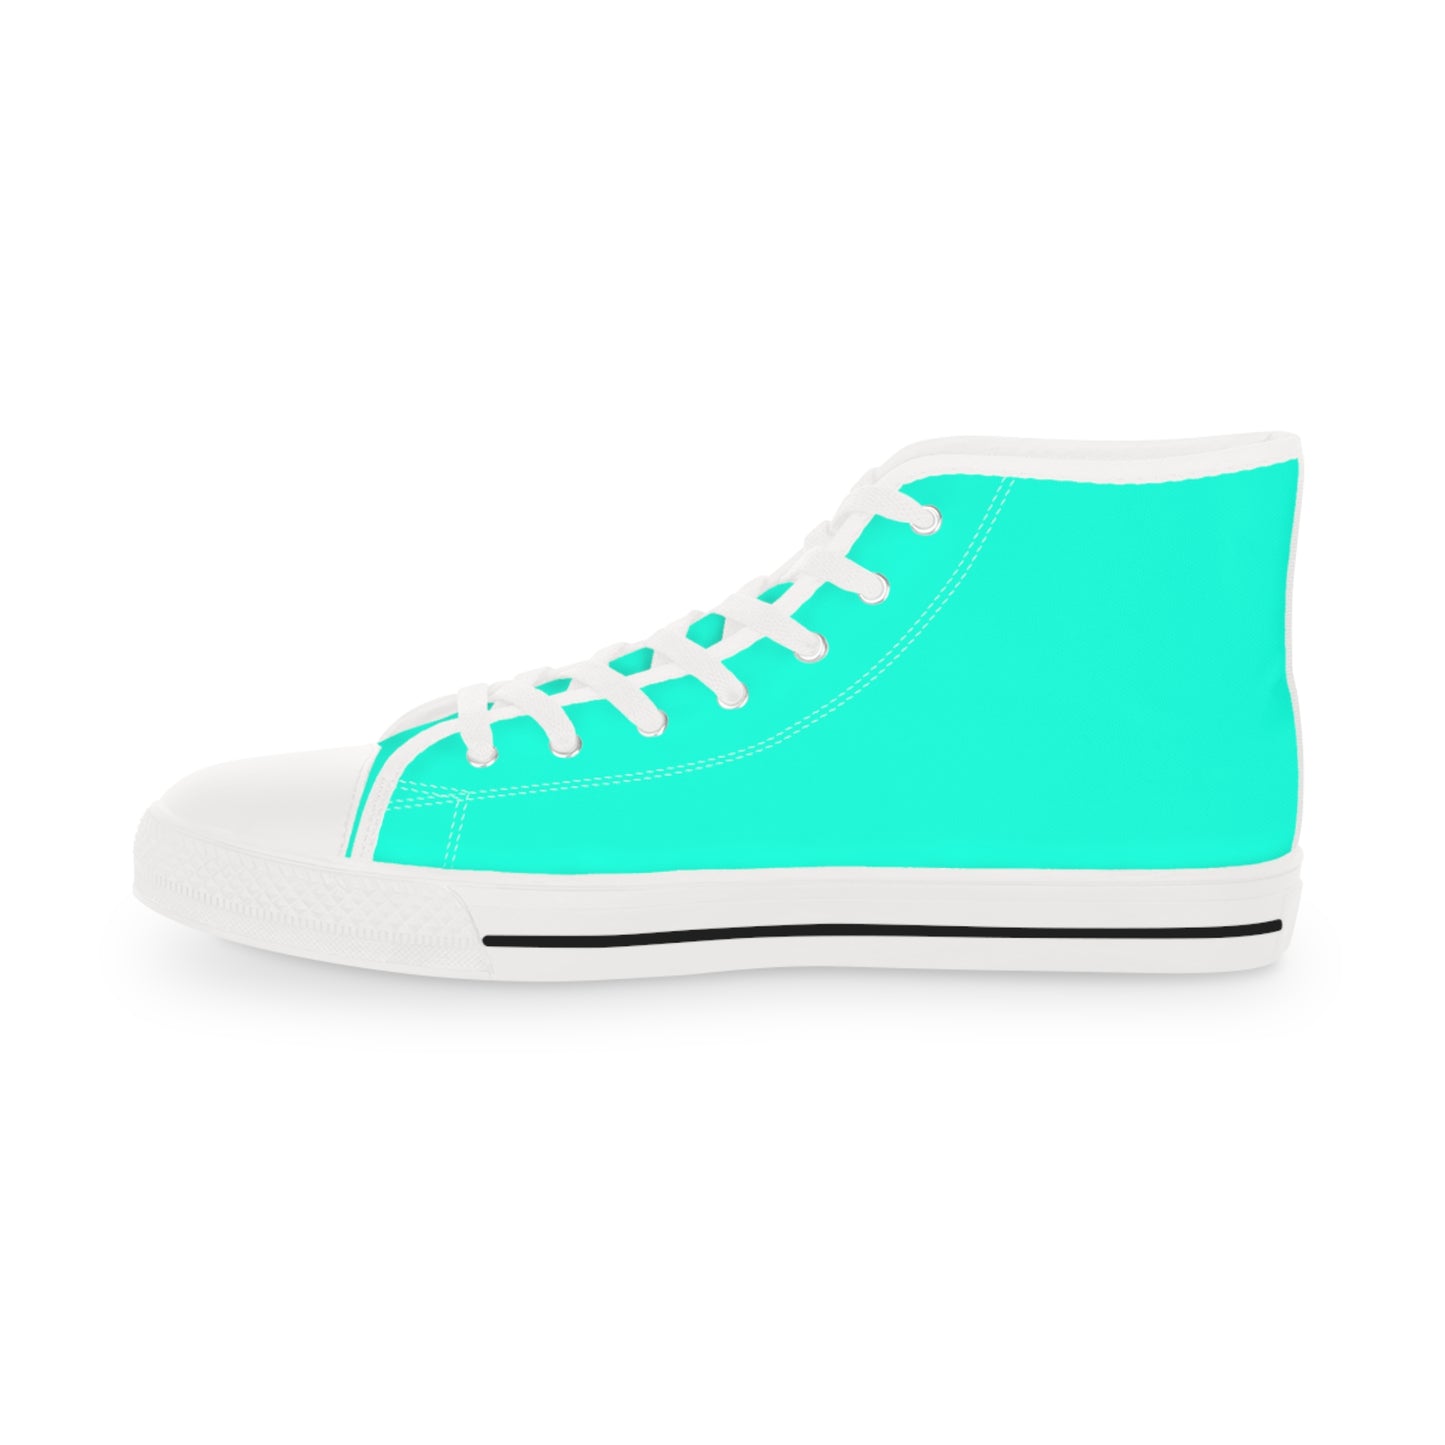 Men's Canvas High Top Solid Color Sneakers - Cool Pool Aqua Green US 14 White sole